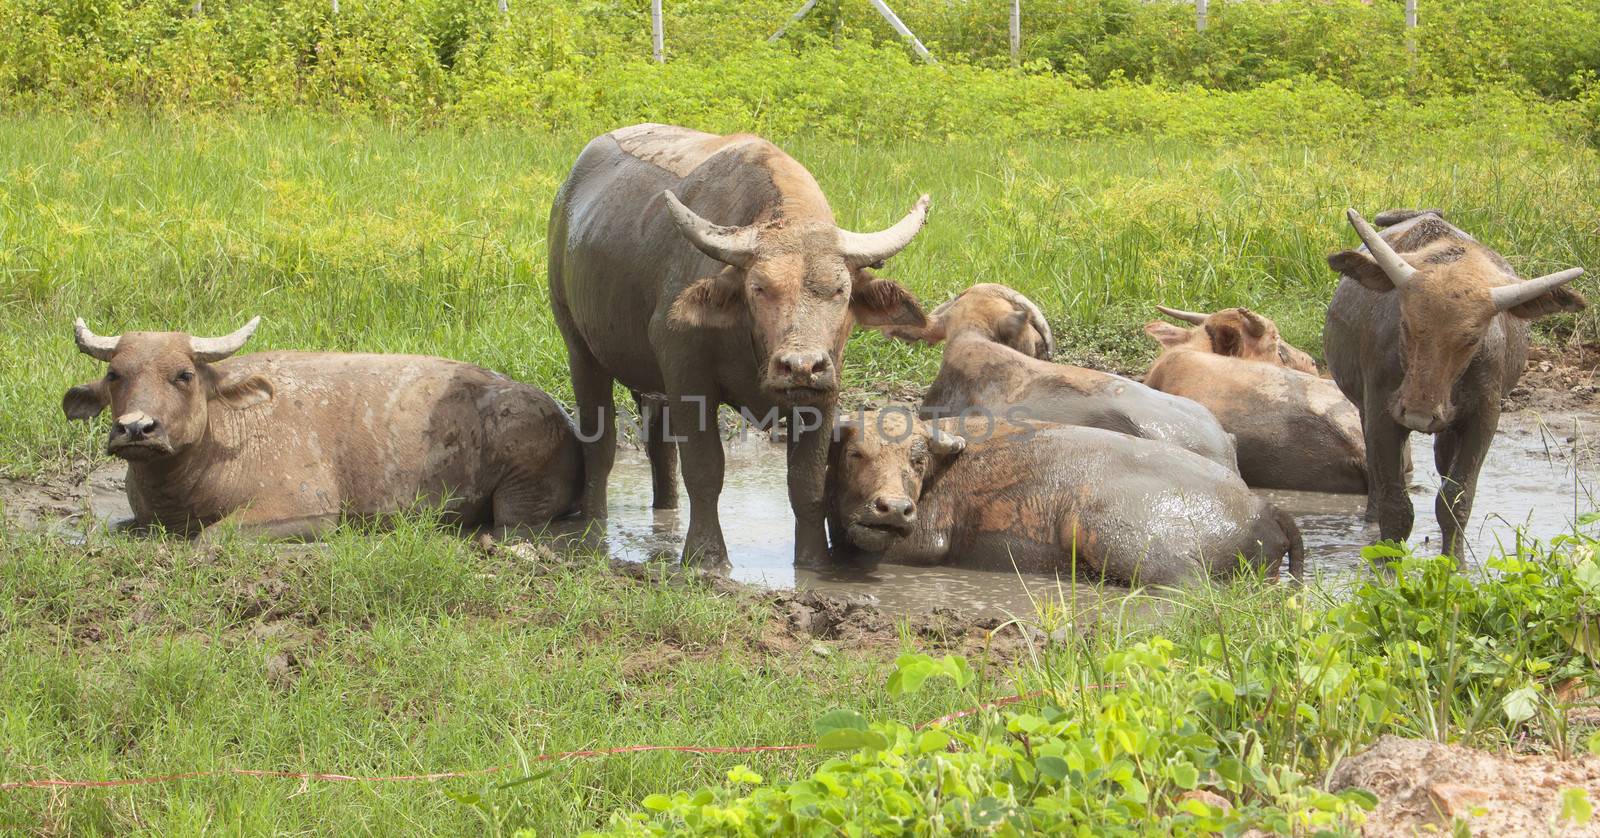 Water buffalo with mud in dirty rest of the animal.